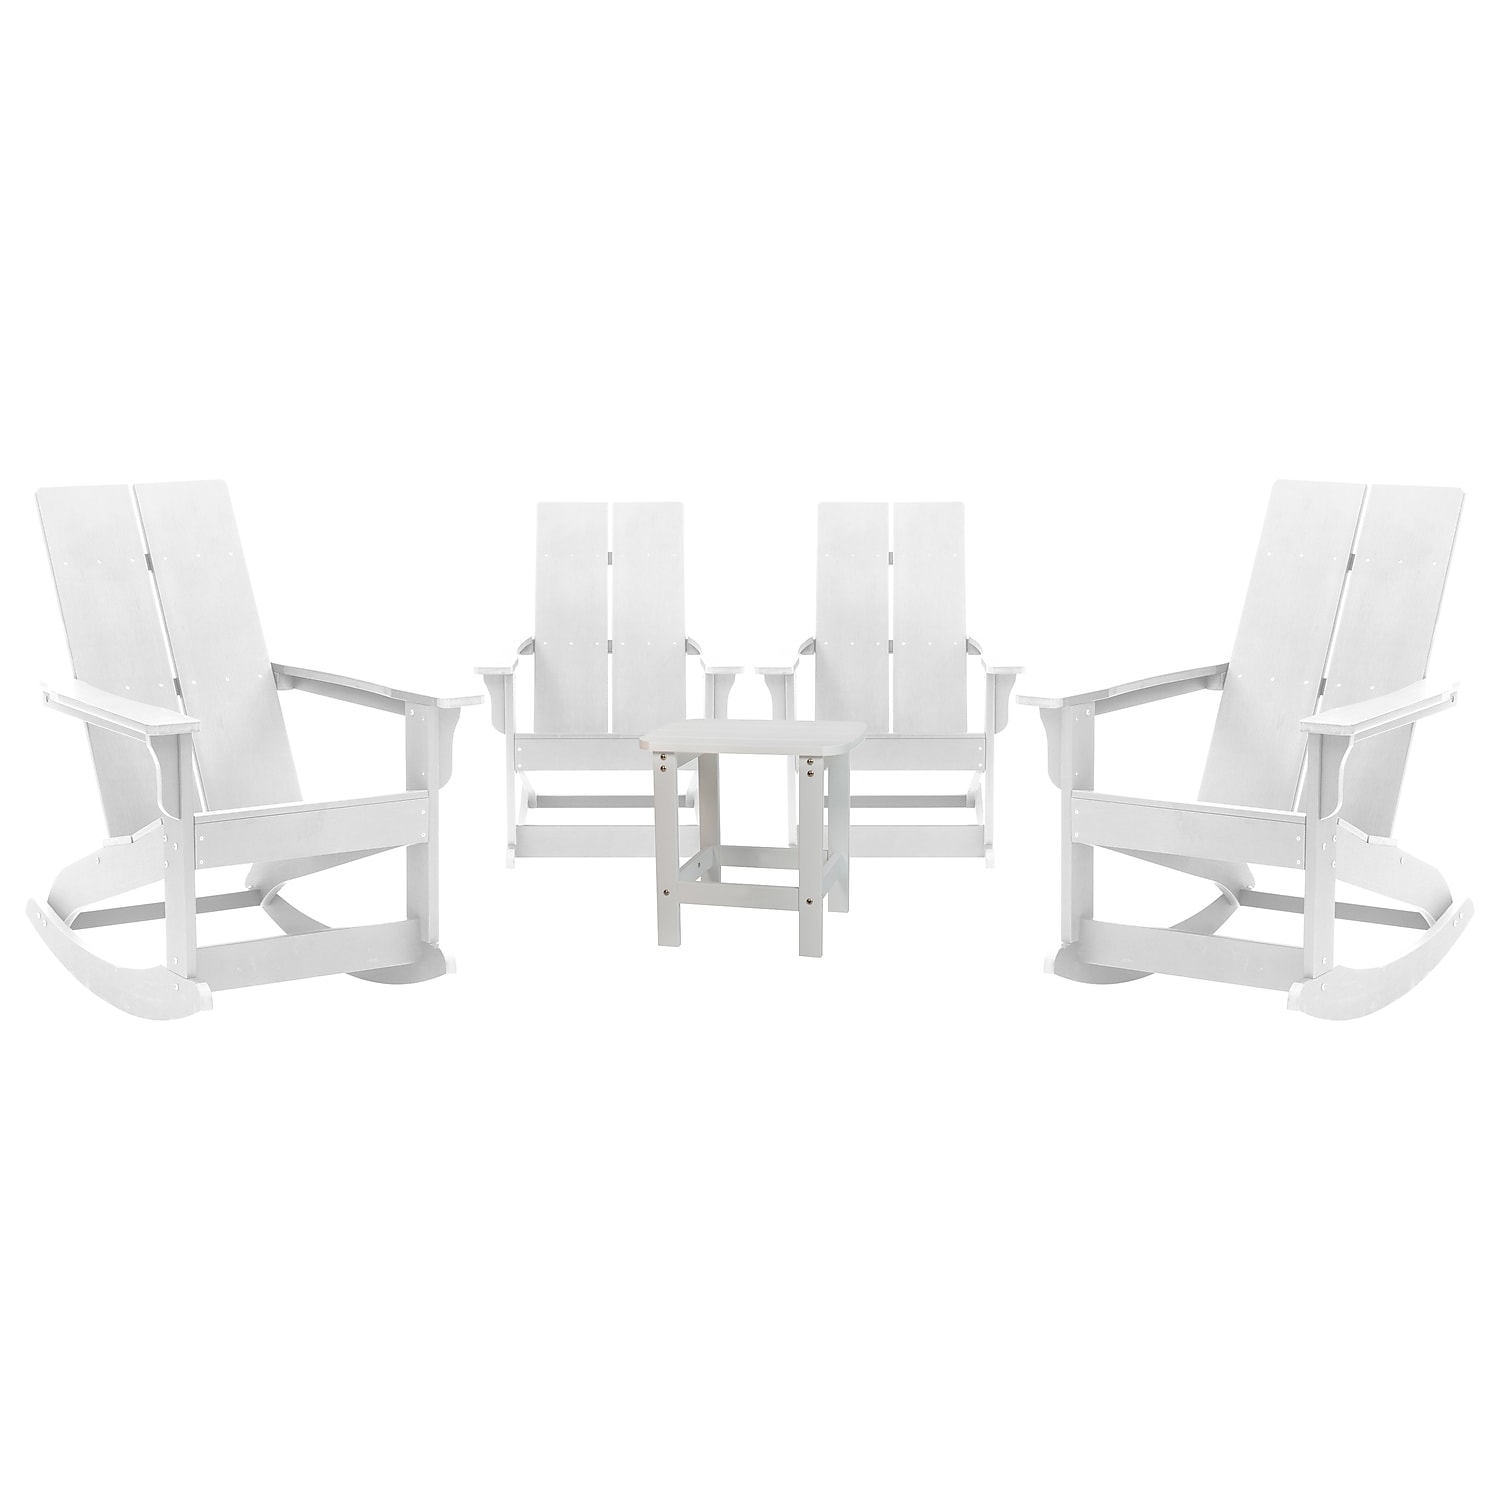 Flash Furniture Finn 5-Piece Adirondack Rocking Patio Chair and Side Table Set, White - image 1 of 9